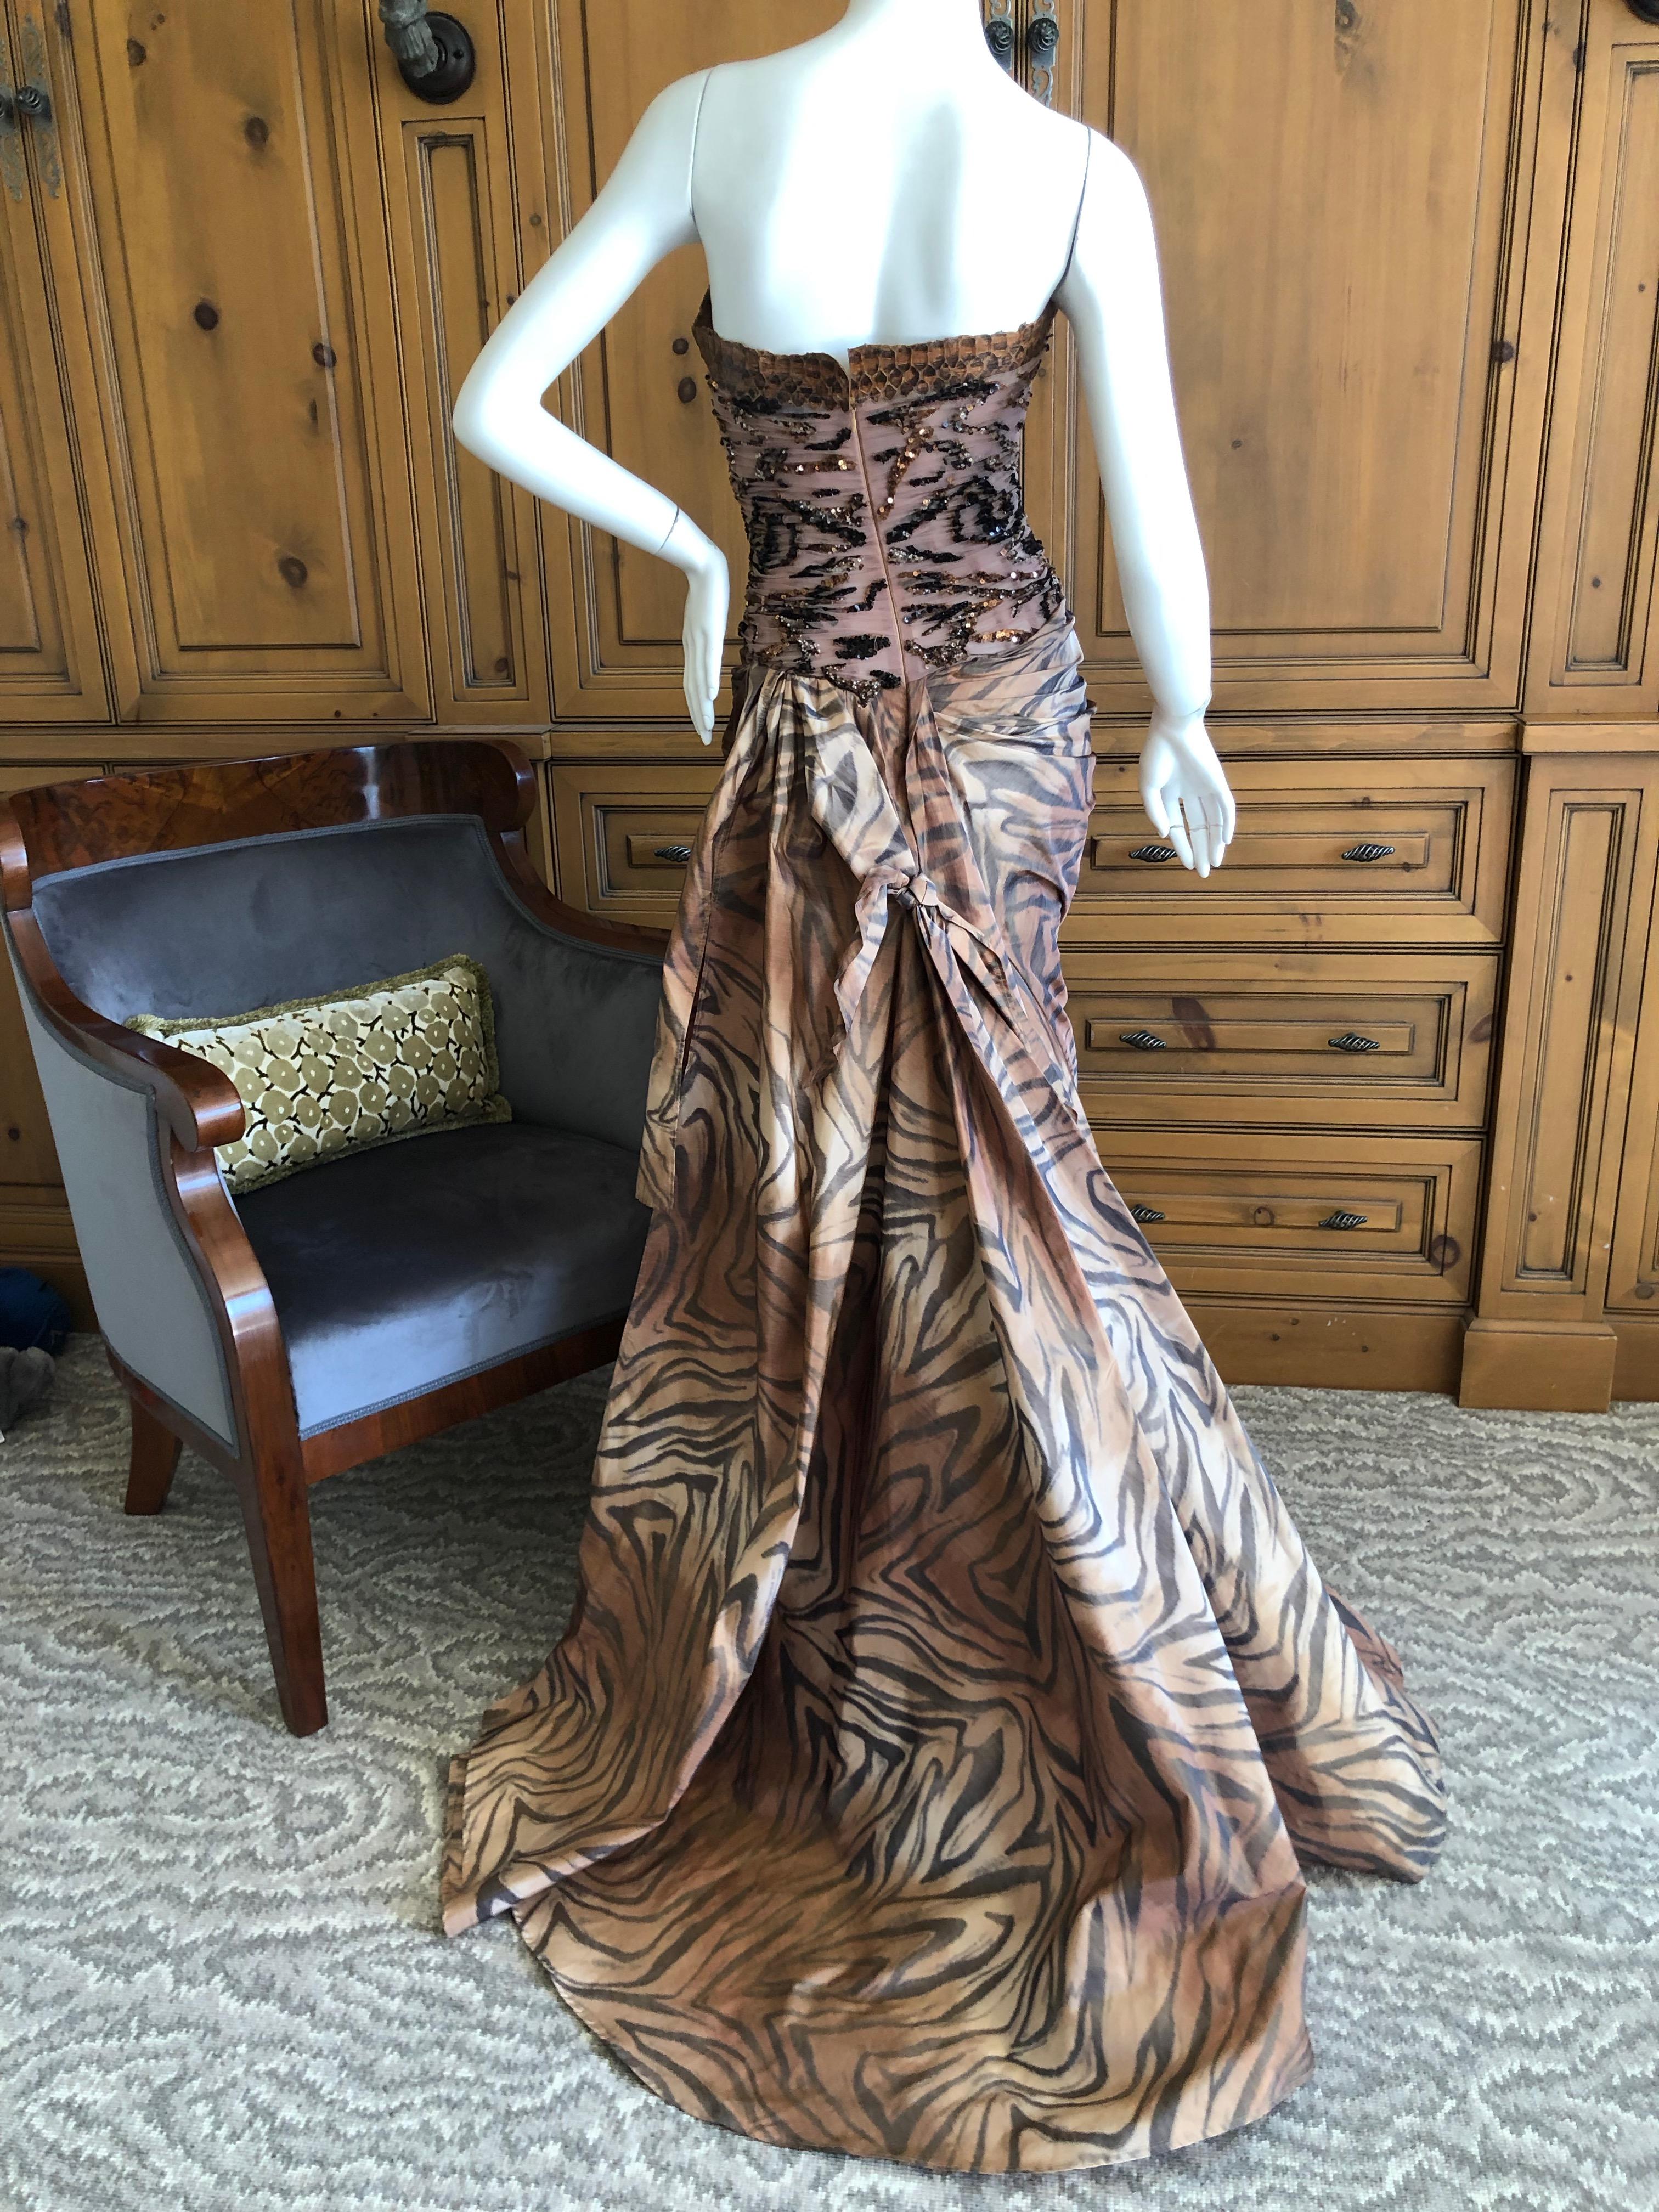 Zuhair Murad Haute Couture VIntage Tiger Print Silk Evening Gown with Inner Corset.
This is spectacular. There is an inner boned corset and train.
Trimmed in some type of reptile, I'm not certain if it is snake or alligator.
Sequin on netting at the